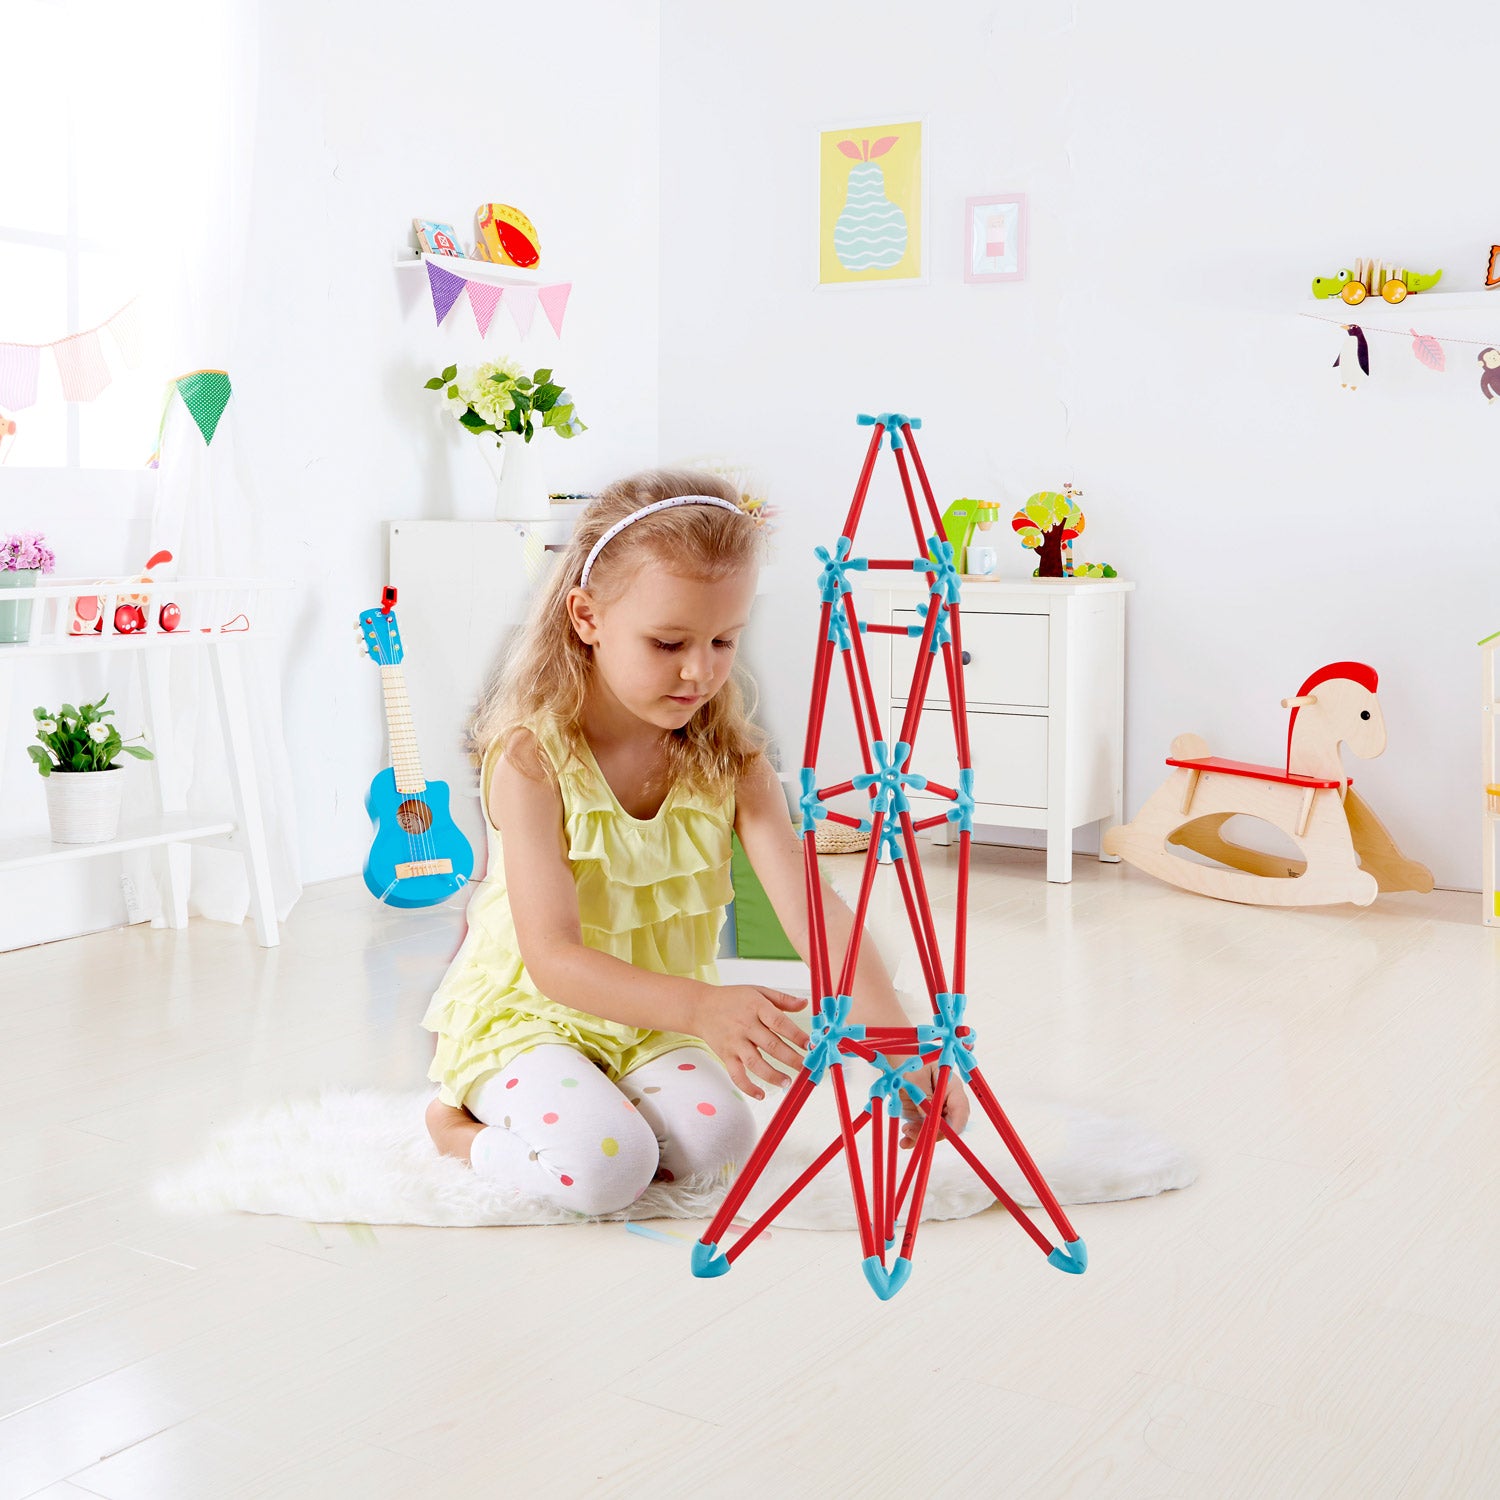 Hape Creativity Kit perfect for little minds and hand, construction and educational high quality bamboo toys The Toy Wagon